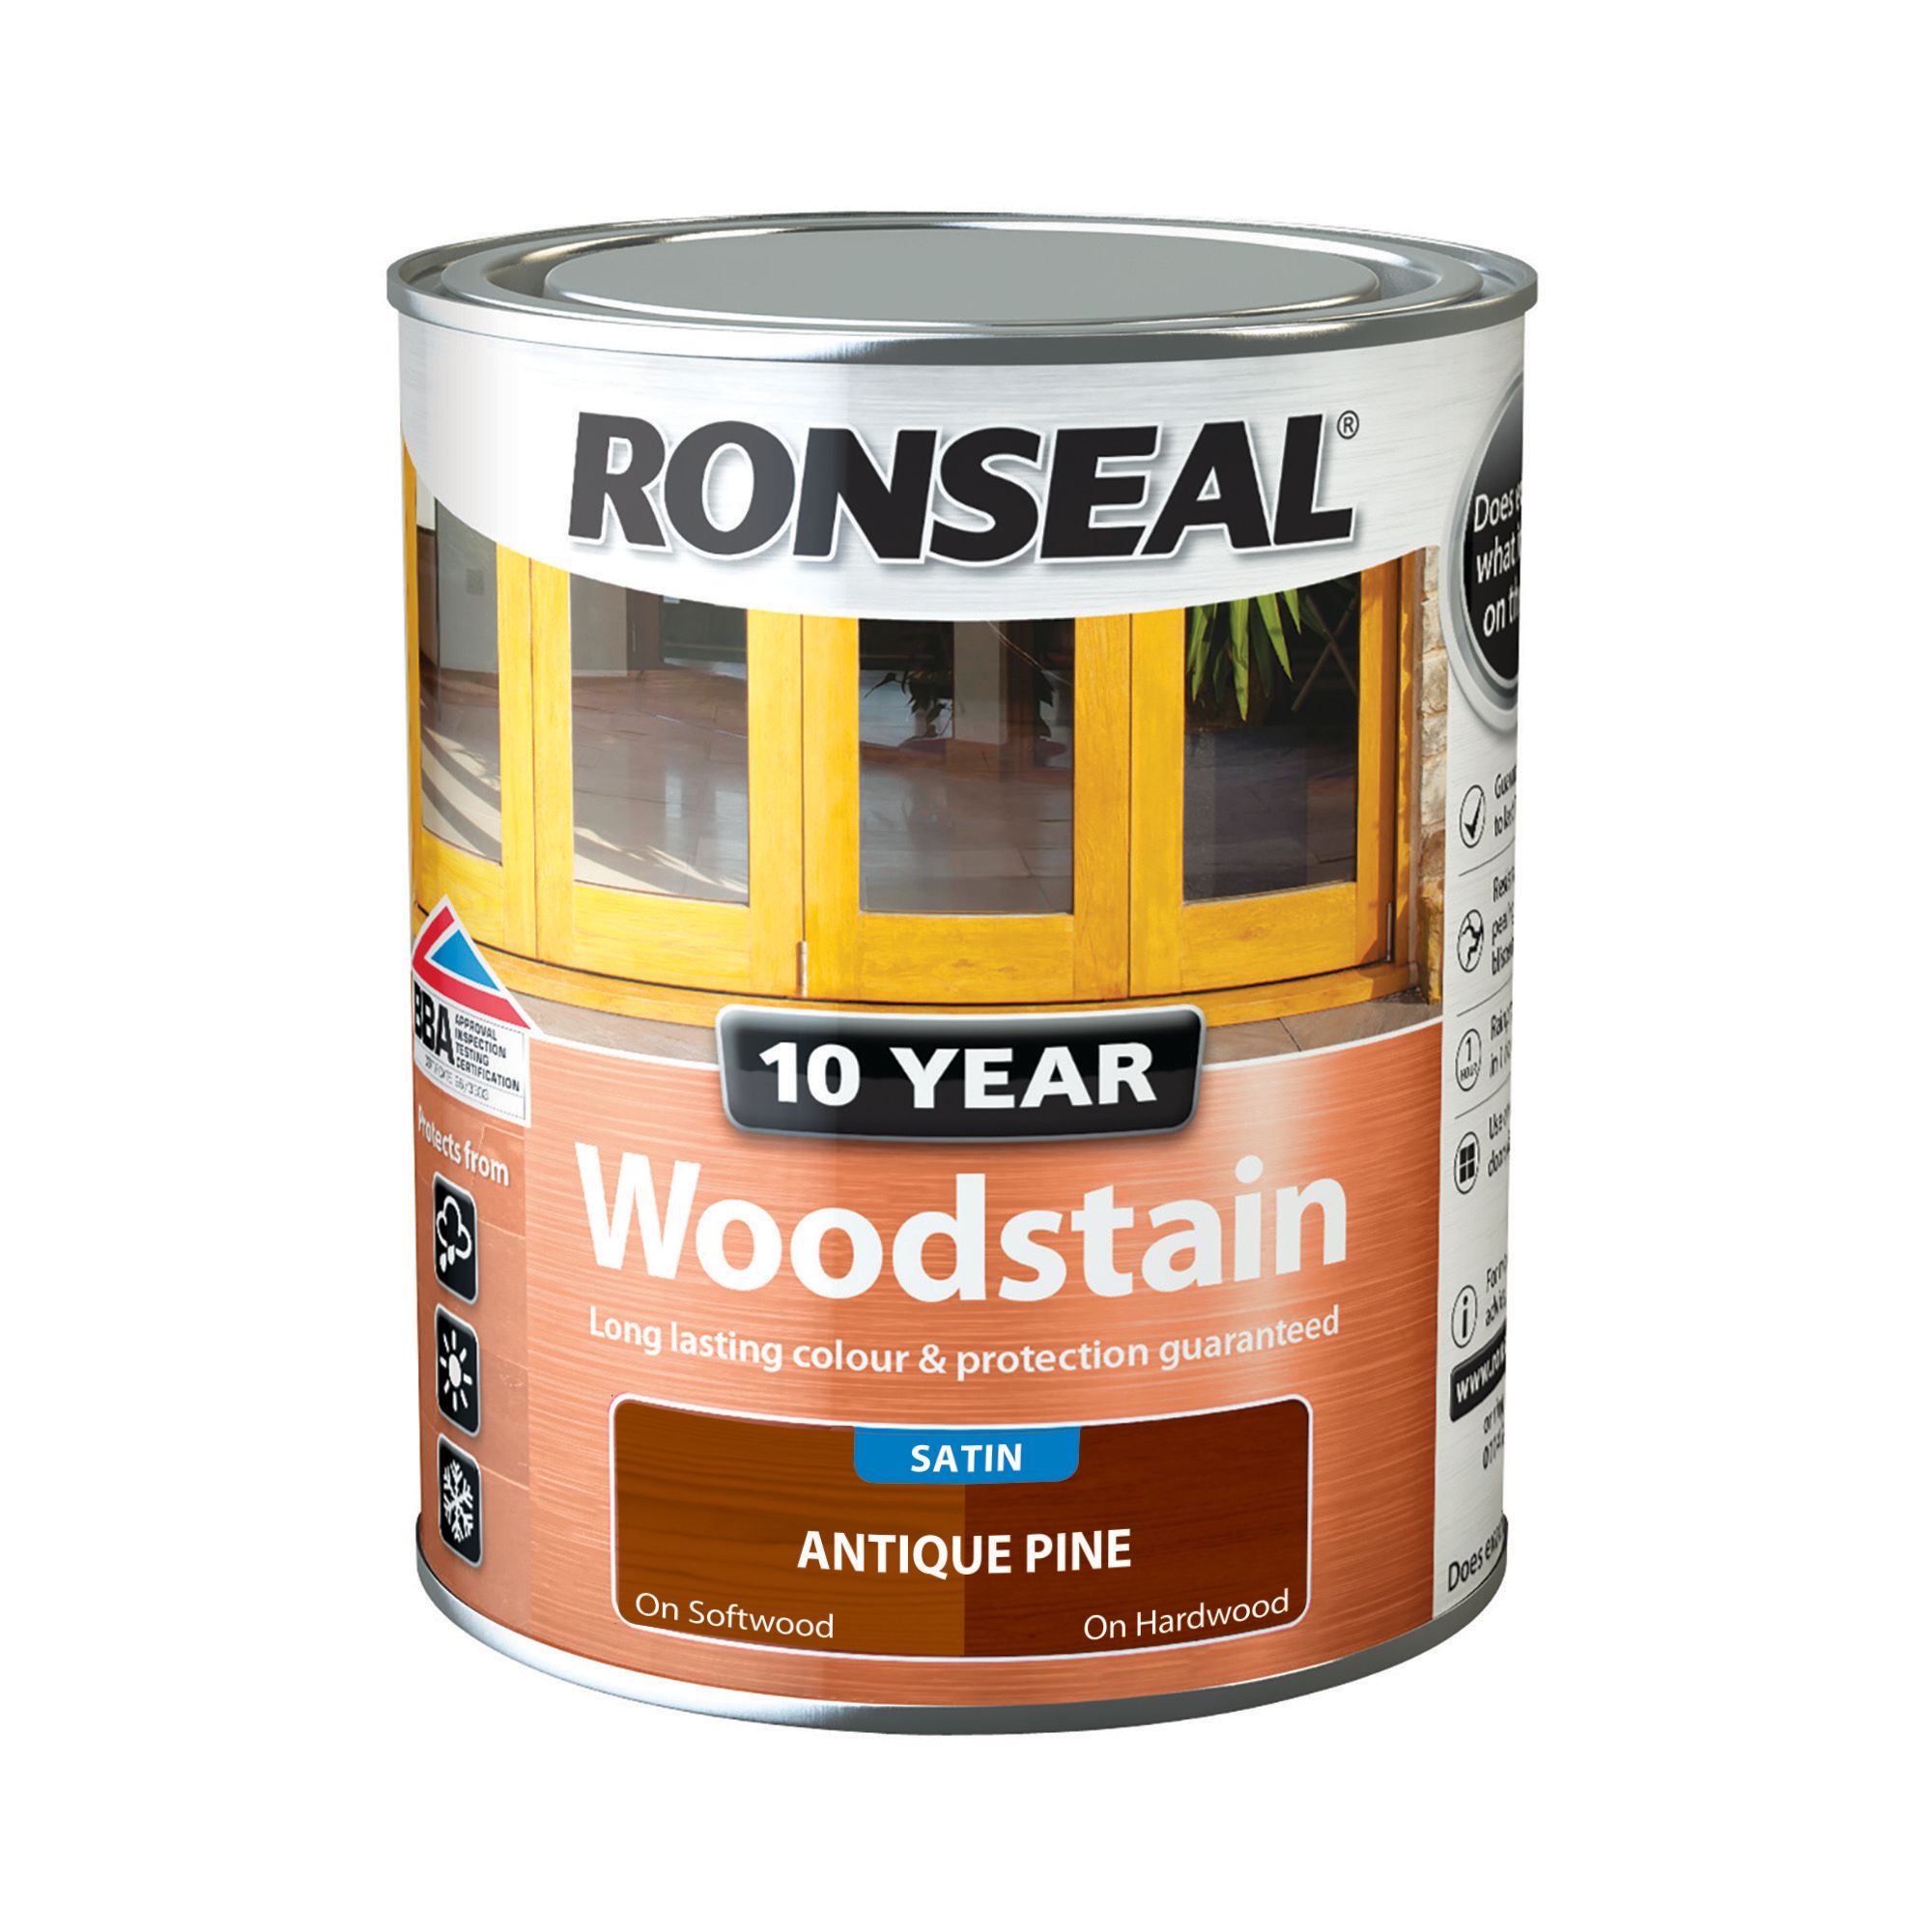 Ronseal 10 Year Woodstain - Antique Pine - 750ml